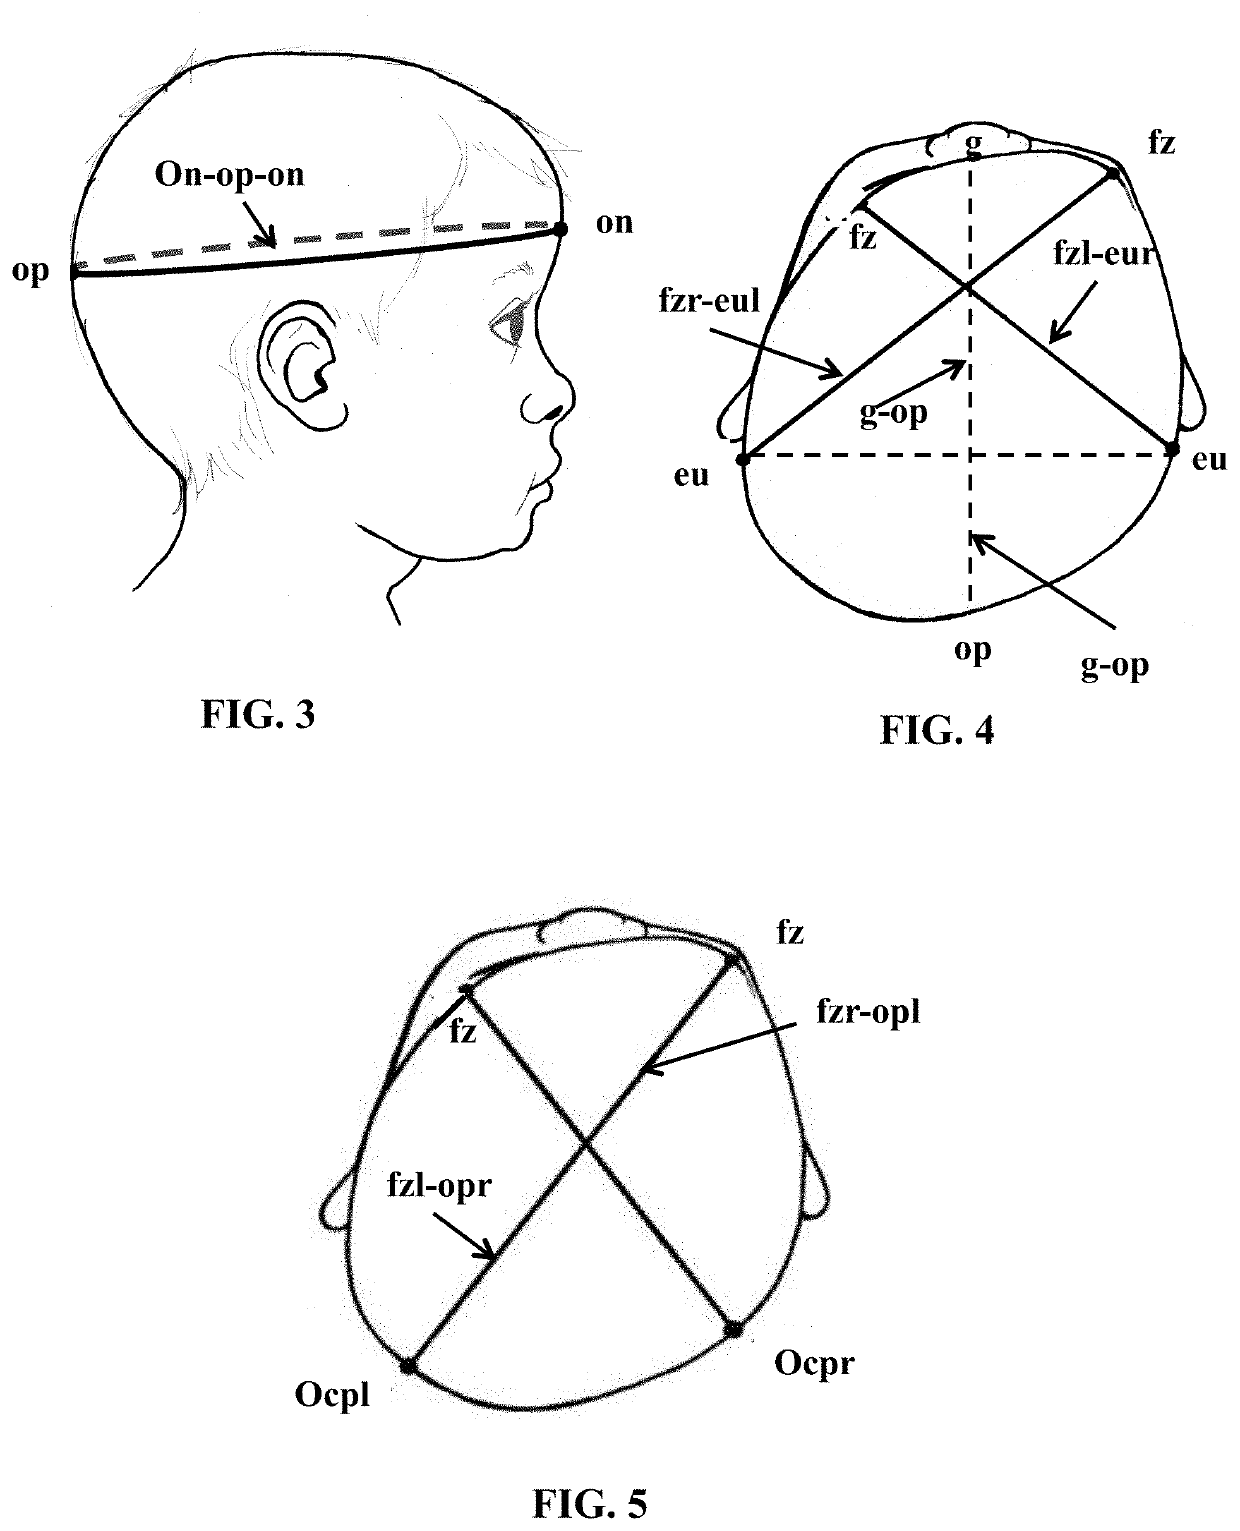 Pediatric head covering for use with three-dimensional imaging